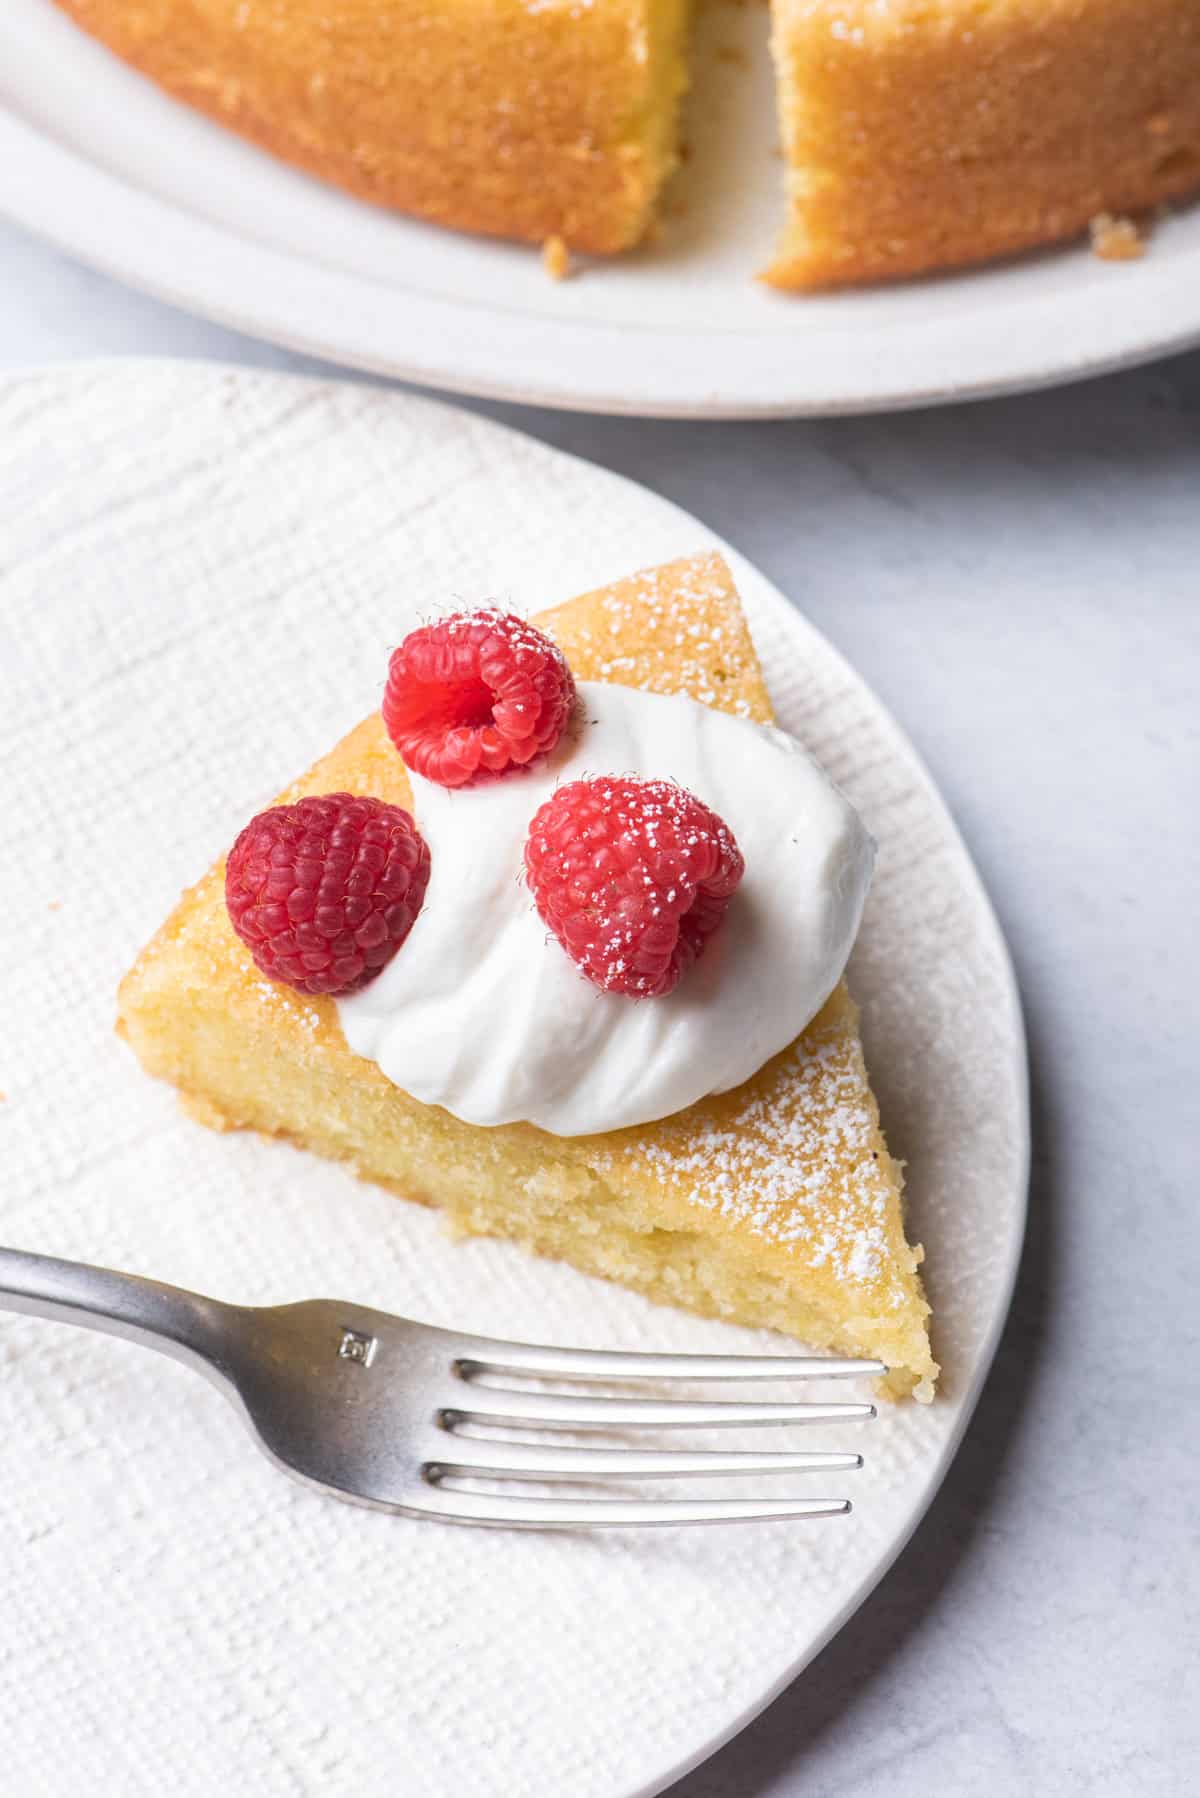 Slice of olive oil cake on a small plate topped with whipped cream and raspberries